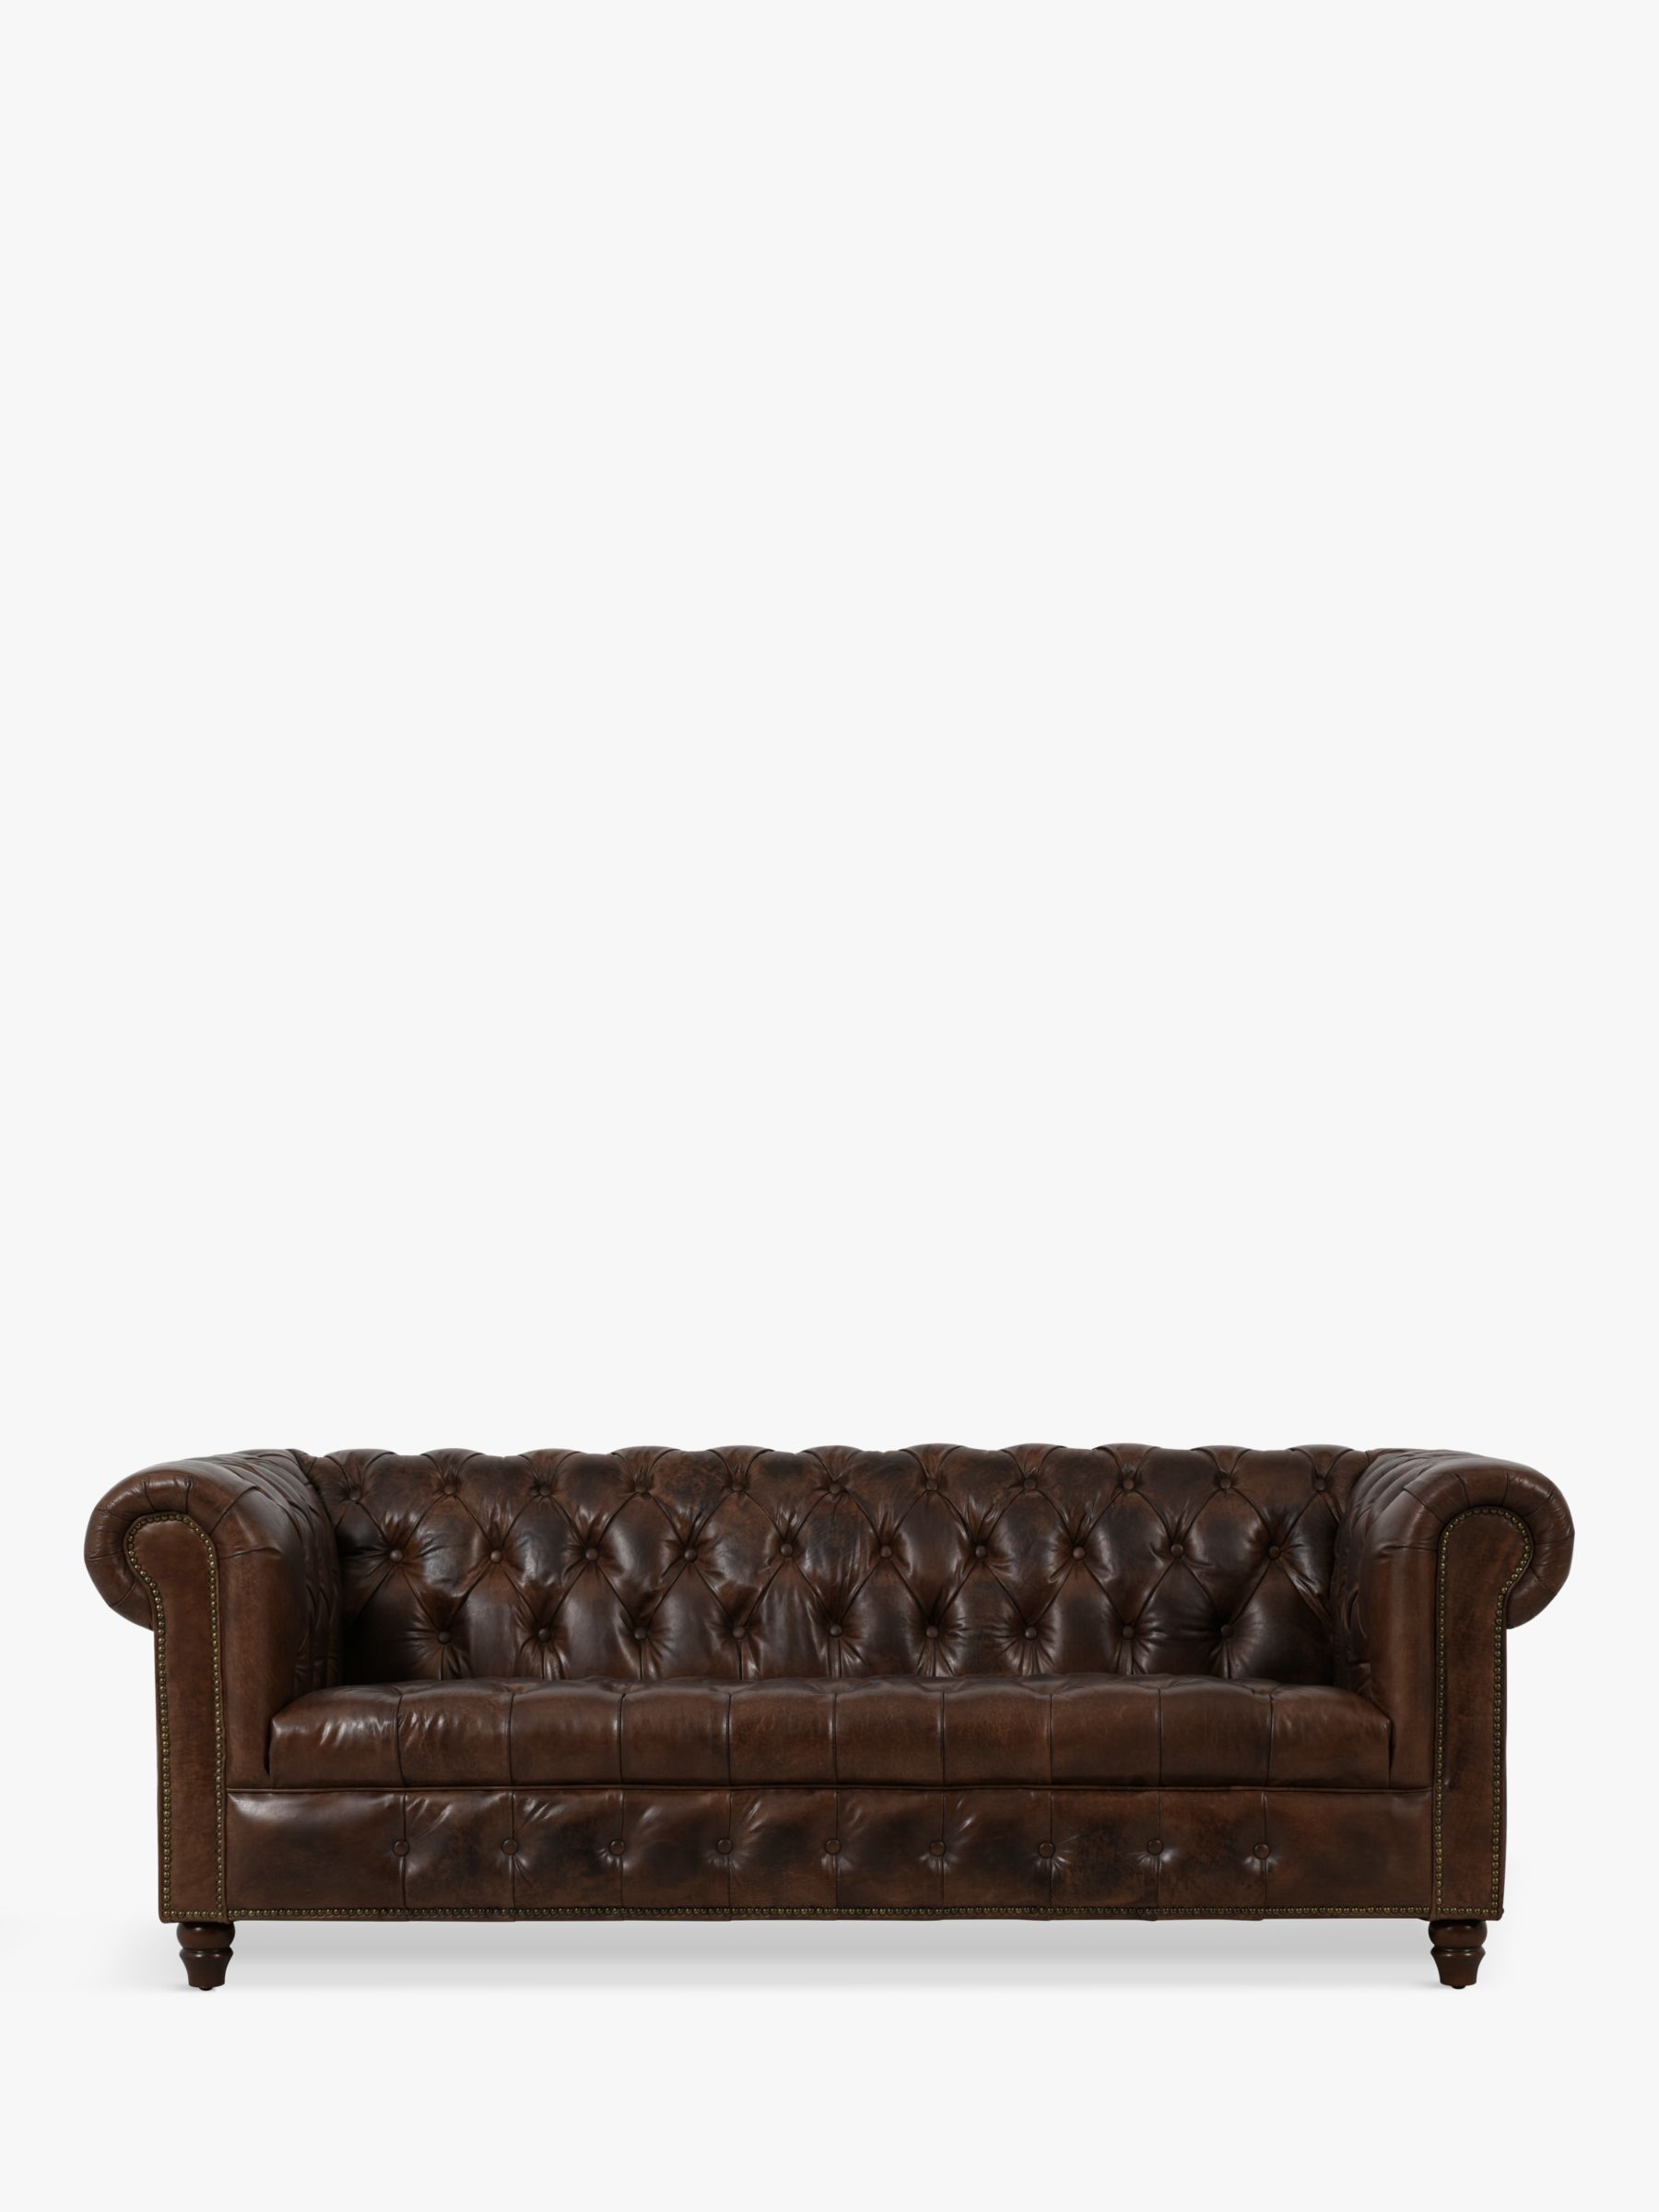 Photo of Halo chesterfield large 3 seater leather sofa london leather cognac